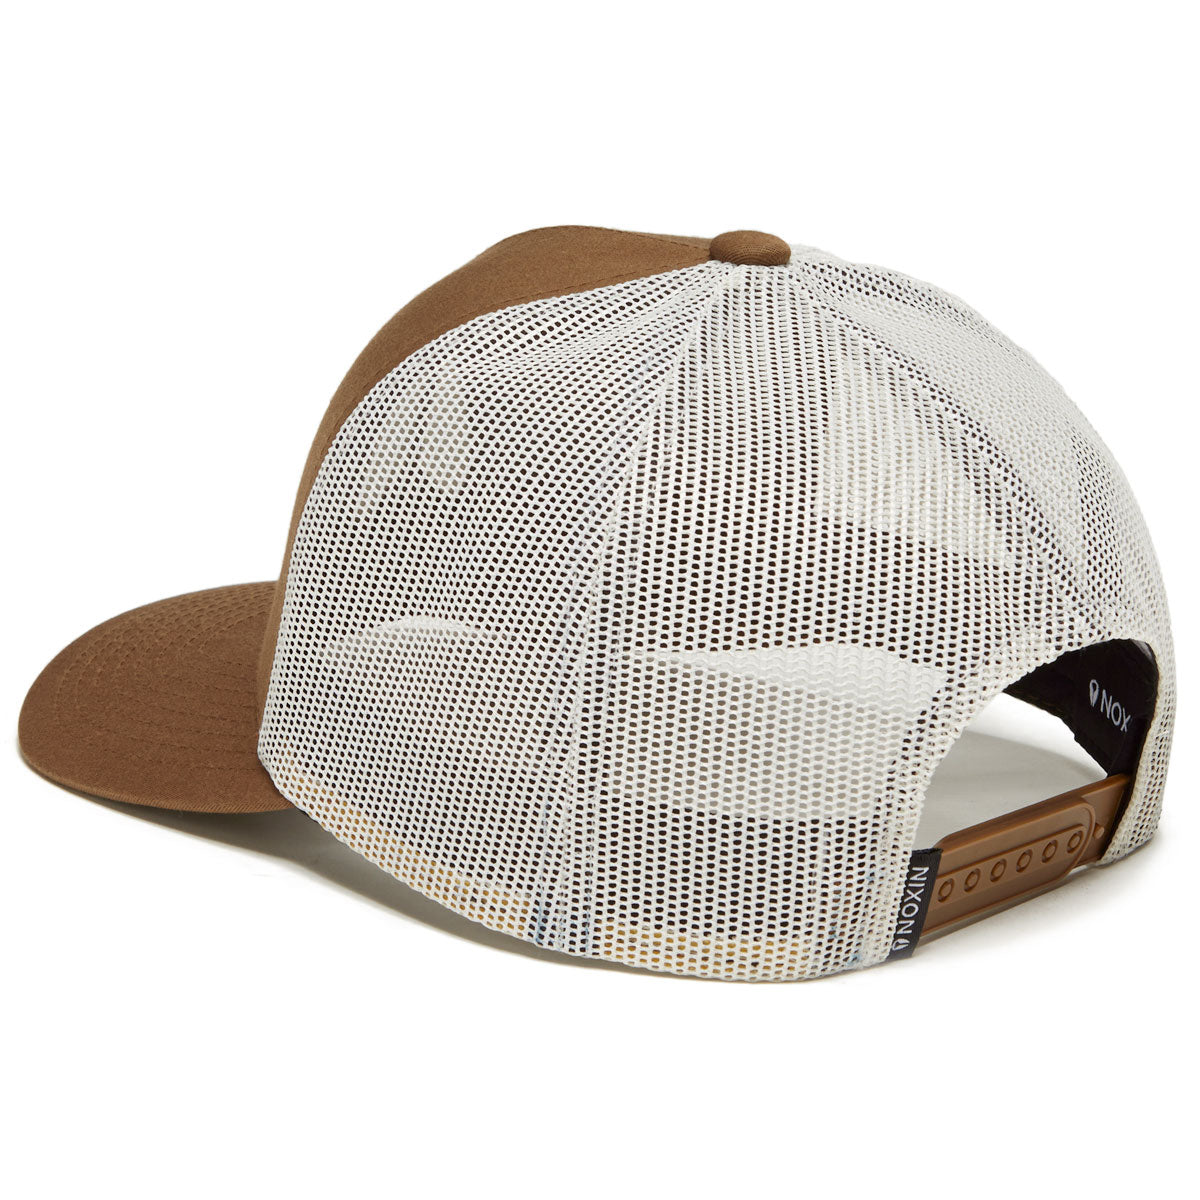 Nixon Iconed Trucker Hat - Brown/Off White image 2